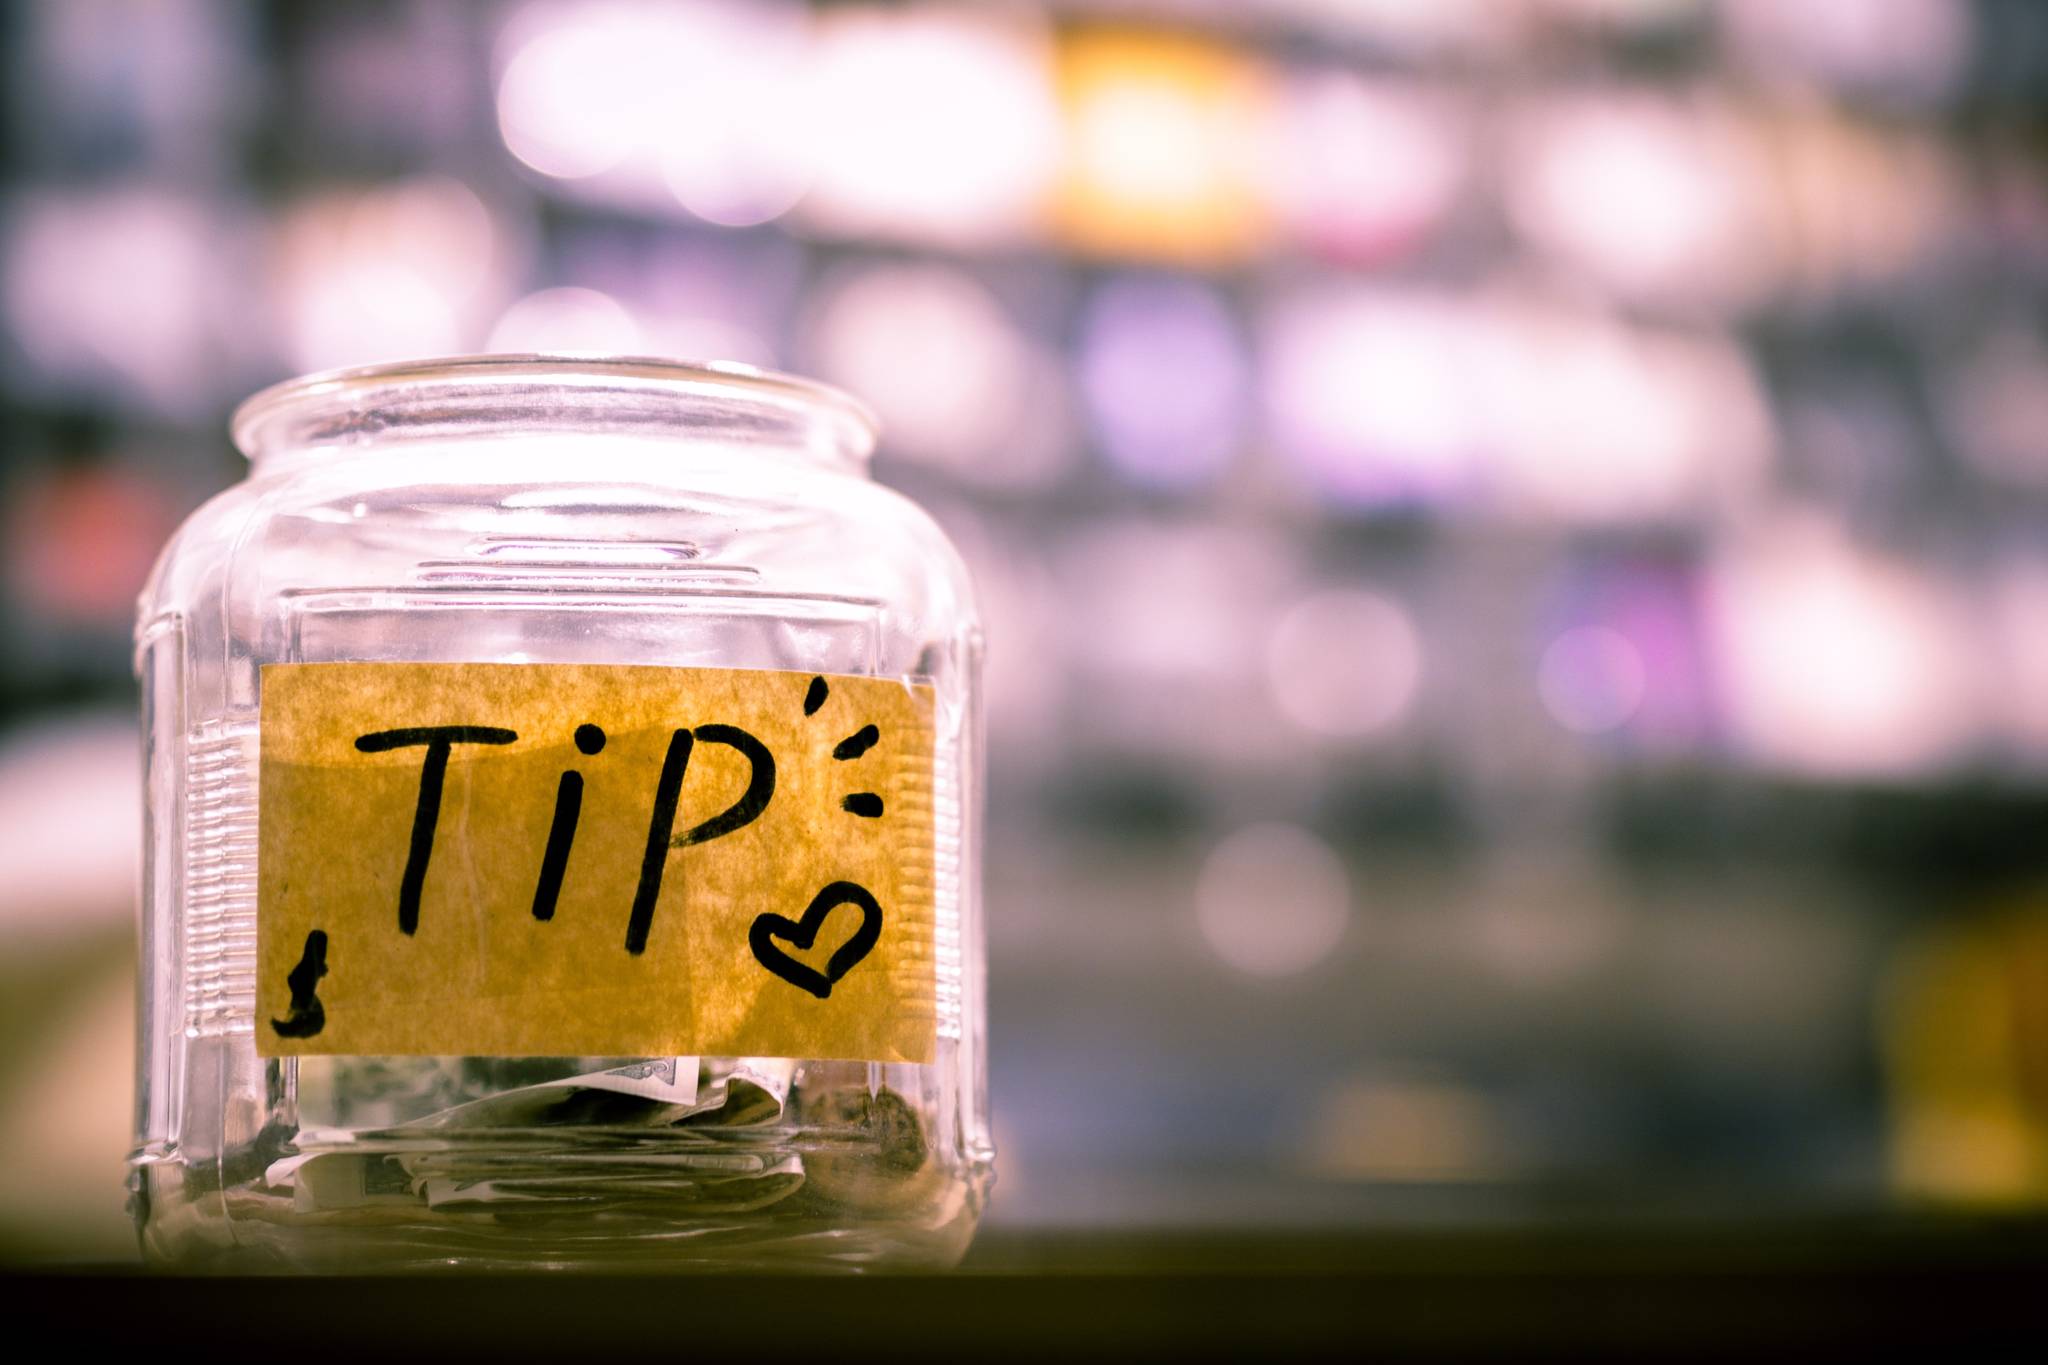 The Alaska Department of Labor has clarified the meaning of a new regulation against enforced tip-pooling. (Sam Truong Dan | Unsplash images)